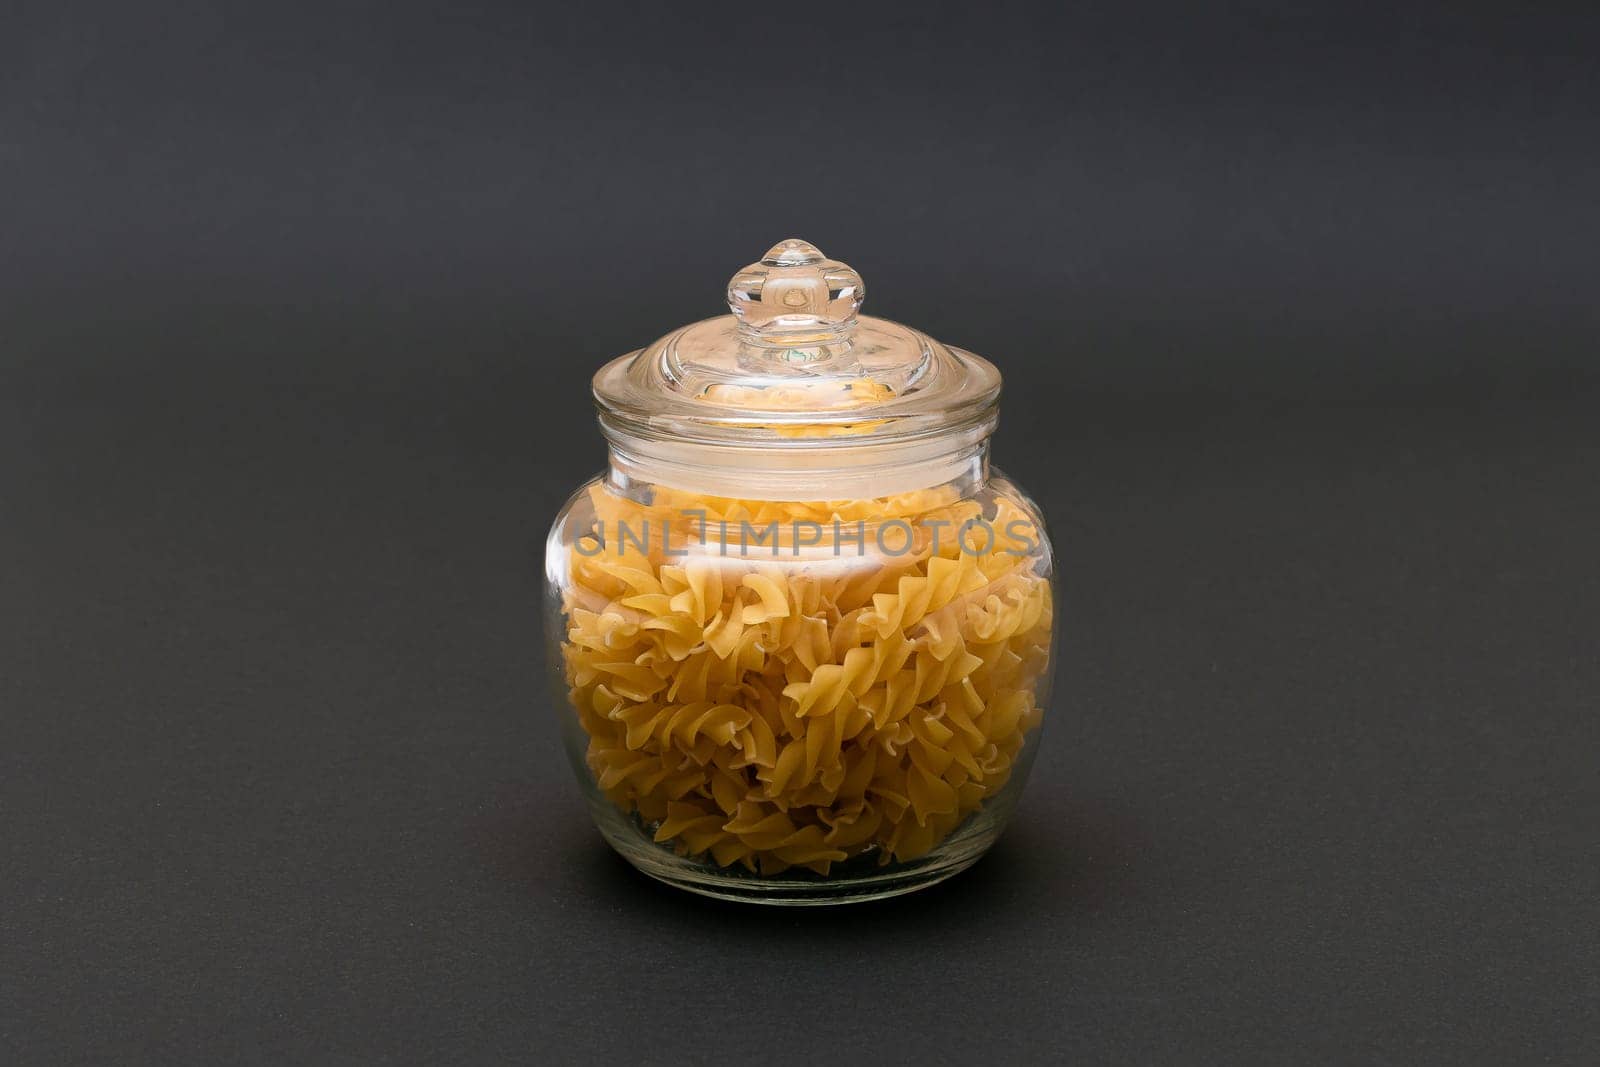 Uncooked Fusilli Pasta in Glass Jar on Black Background. Raw and Dry Macaroni. Unhealthy and Fat Food. Italian Culture